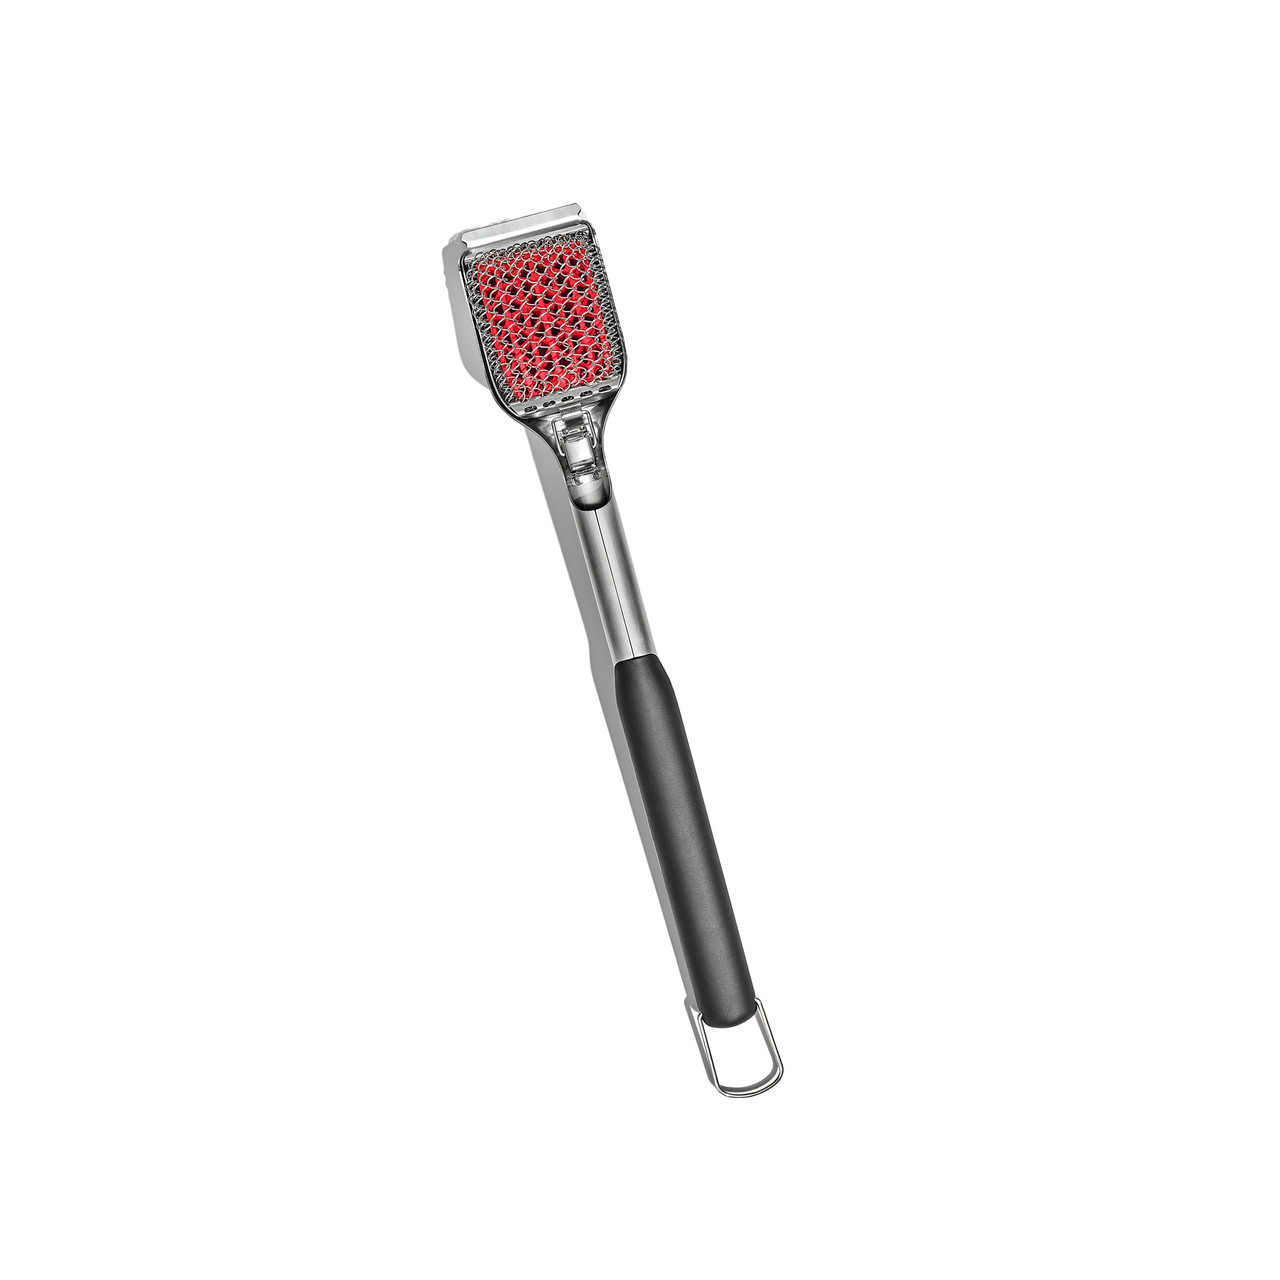 OXO Good Grips Cold Clean Grill Brush + Reviews